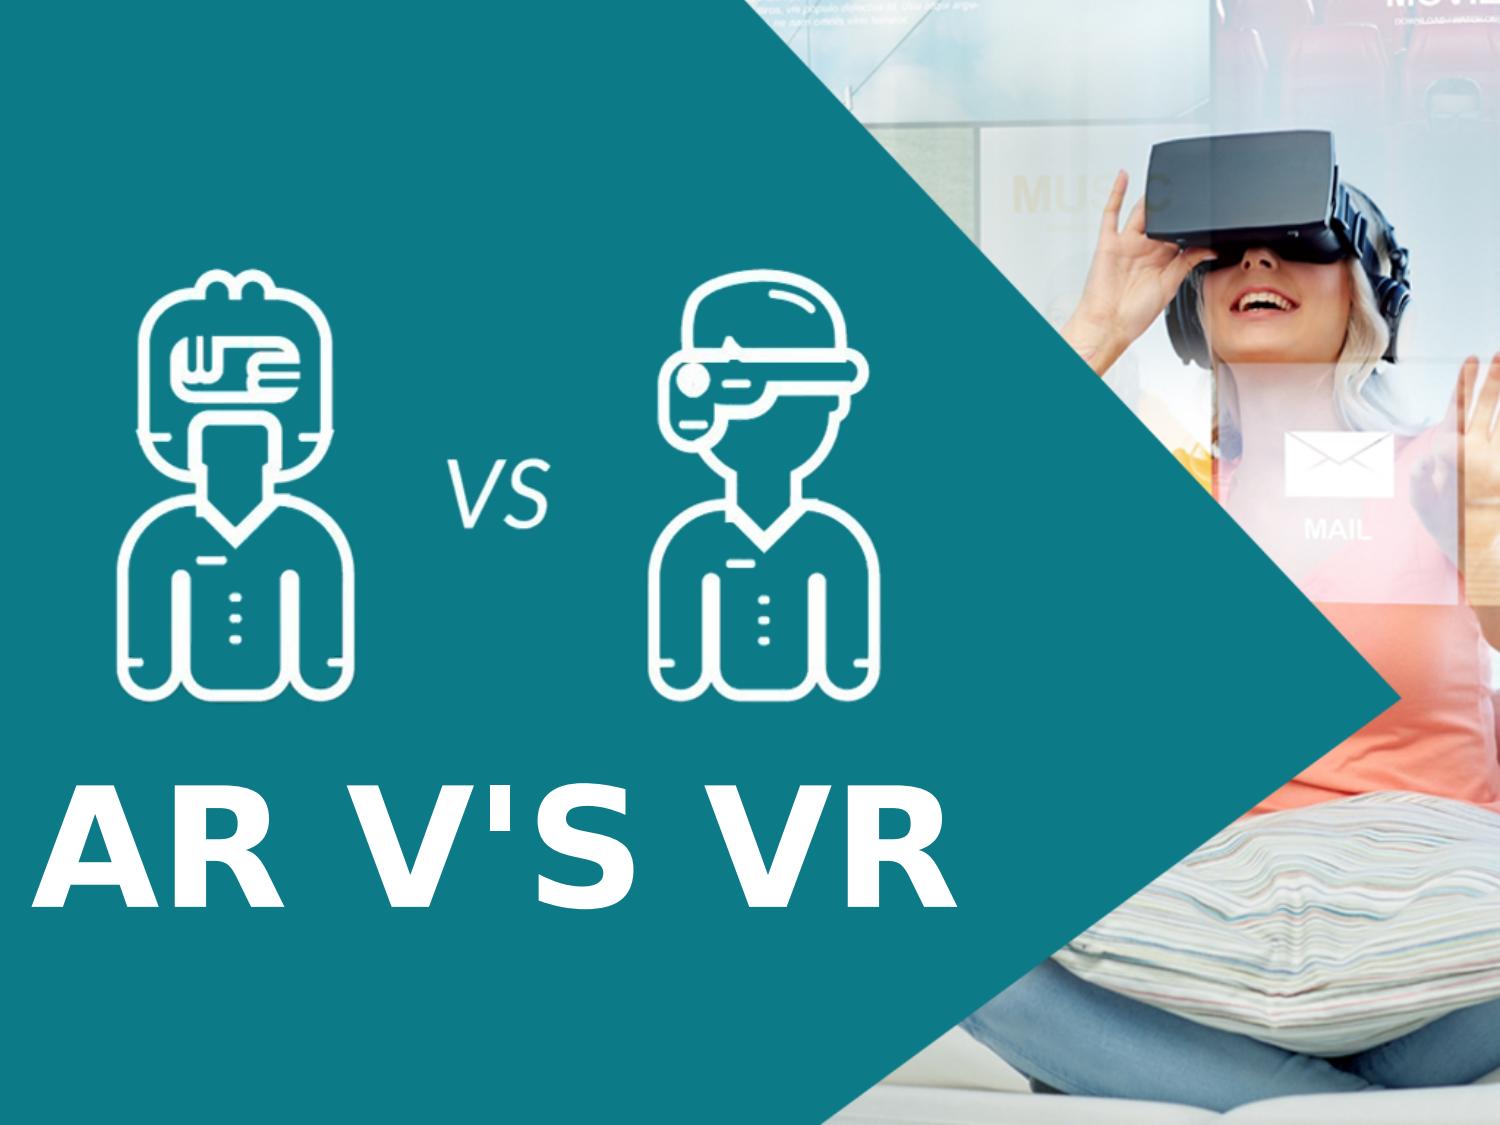 VR vs AR (Virtual Reality vs Augmented Reality): What Is The Difference Between The Two Technologies?